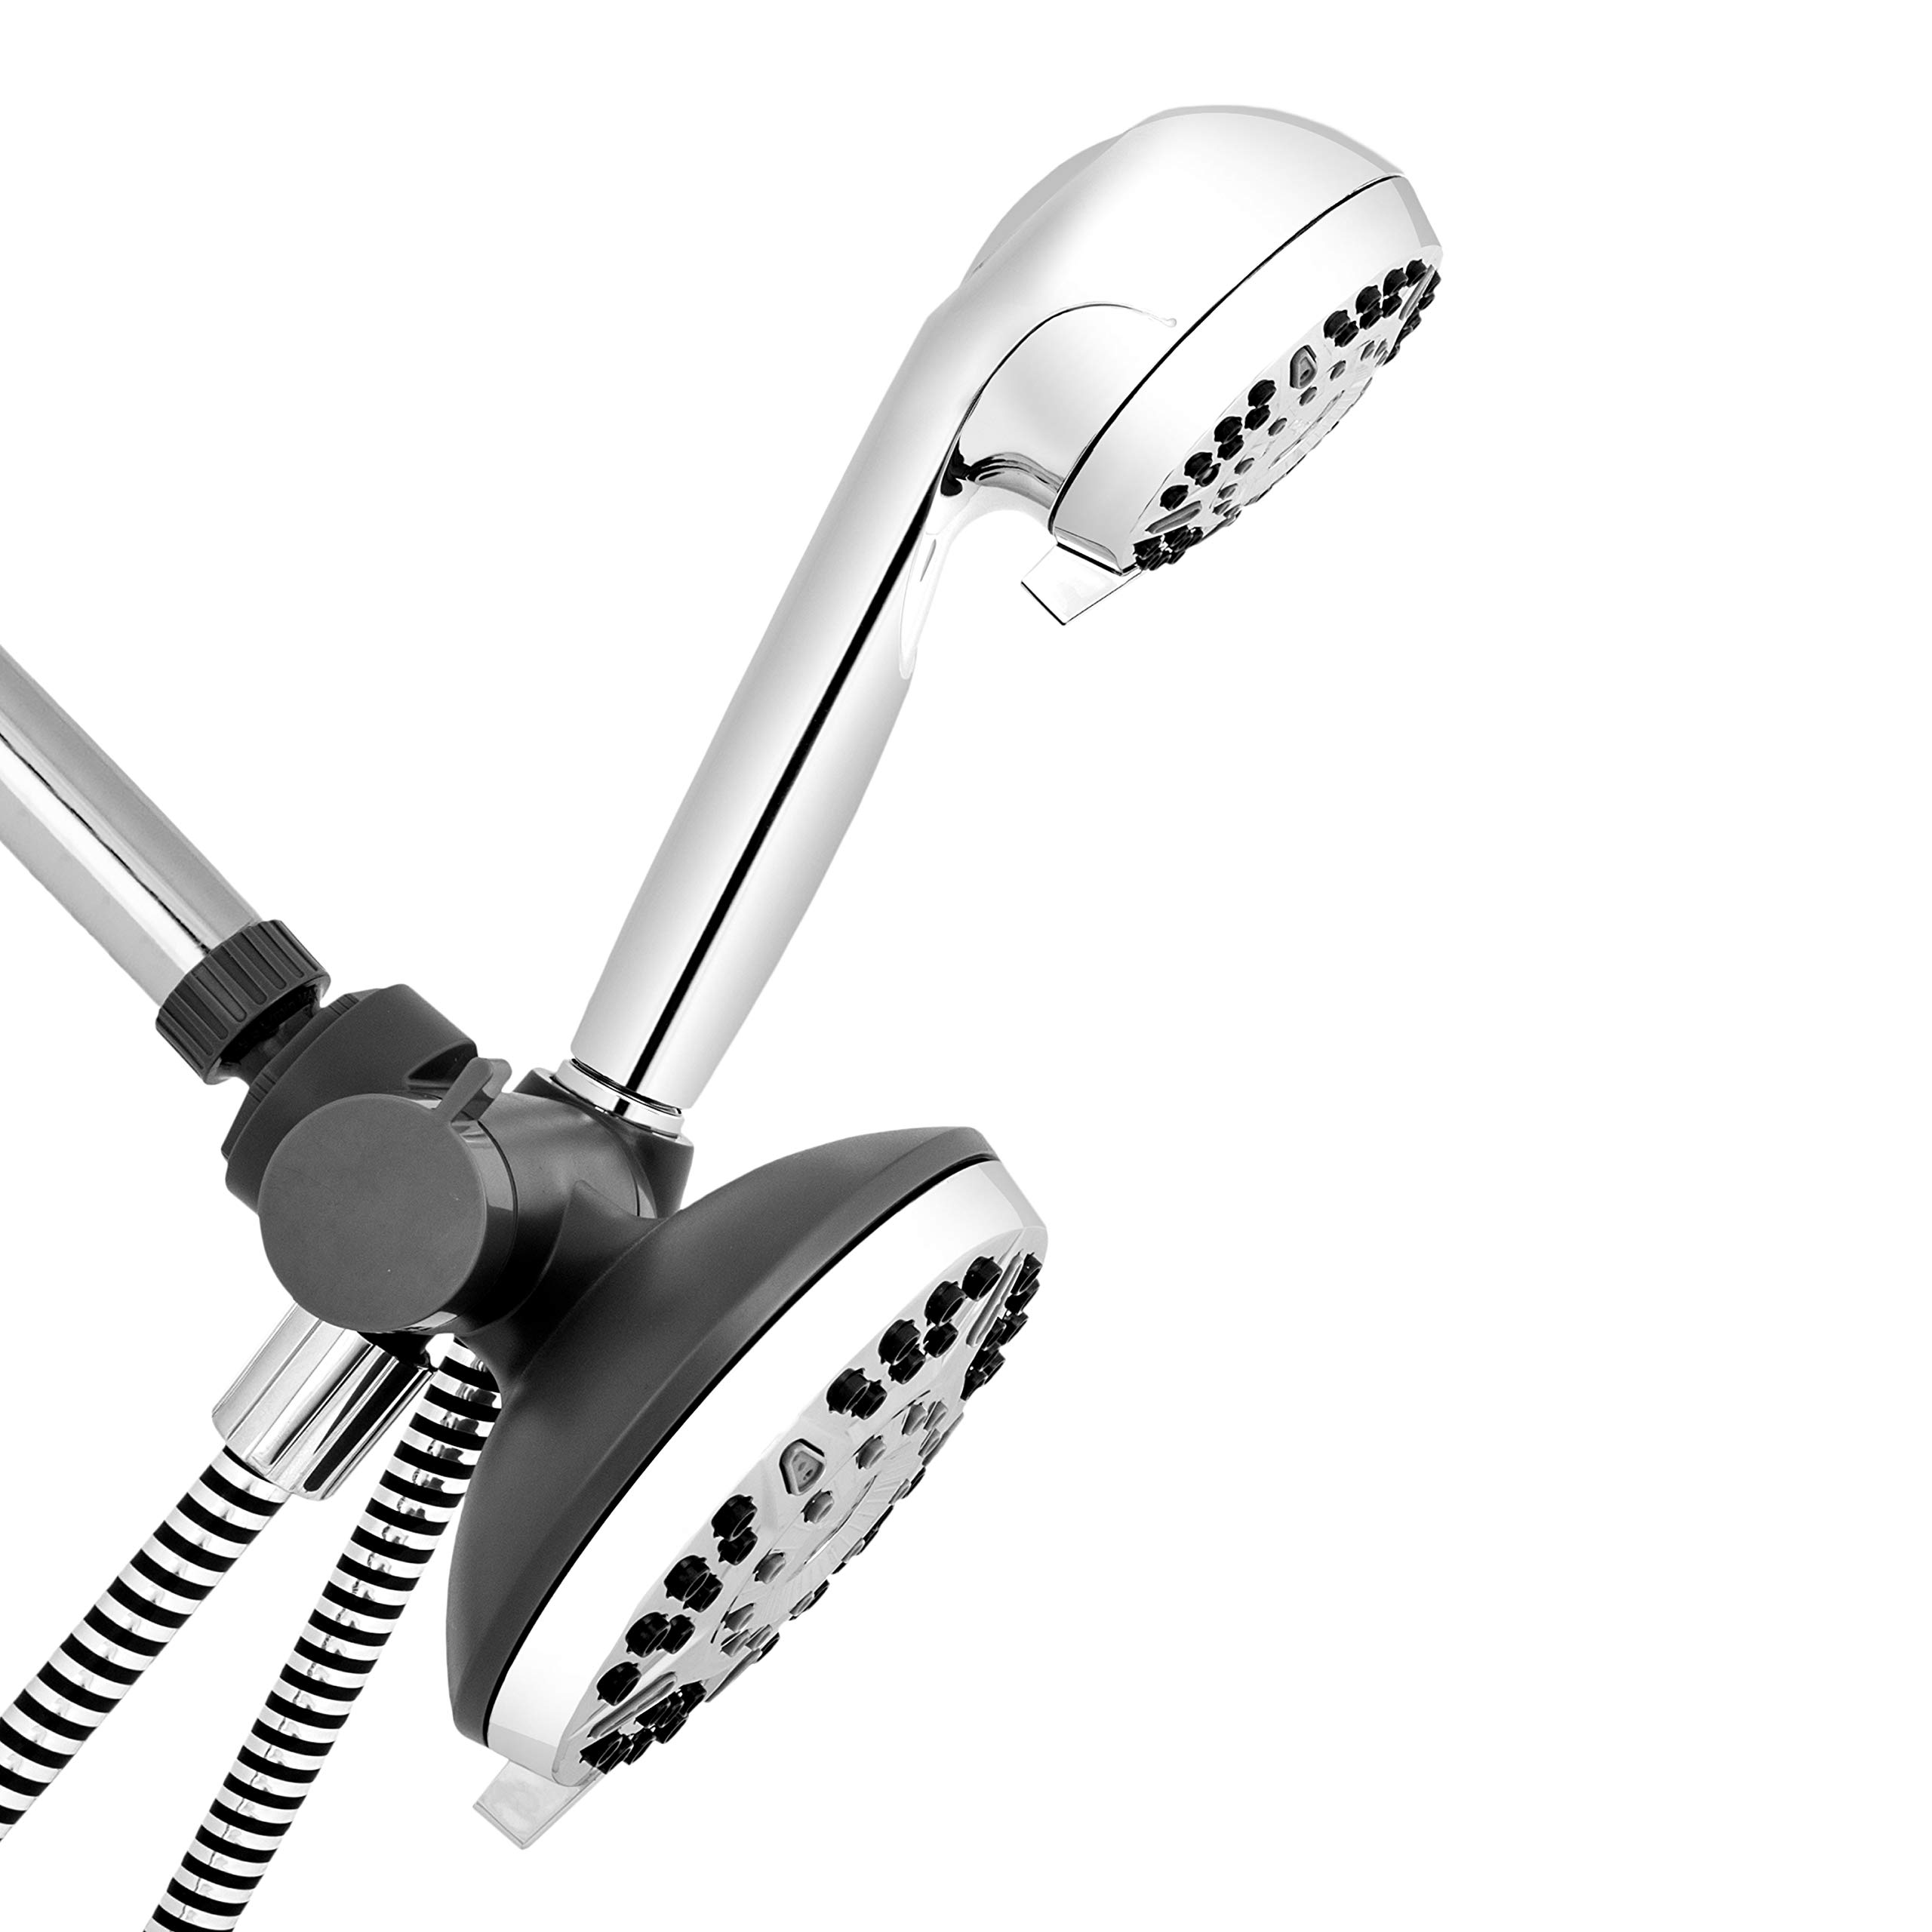 Waterpik High Pressure Shower Head Handheld Spray, 2-in-1 Dual System with 5-Foot Hose PowerPulse Therapeutic Massage, Chrome, 2.5 GPM XET-633-643